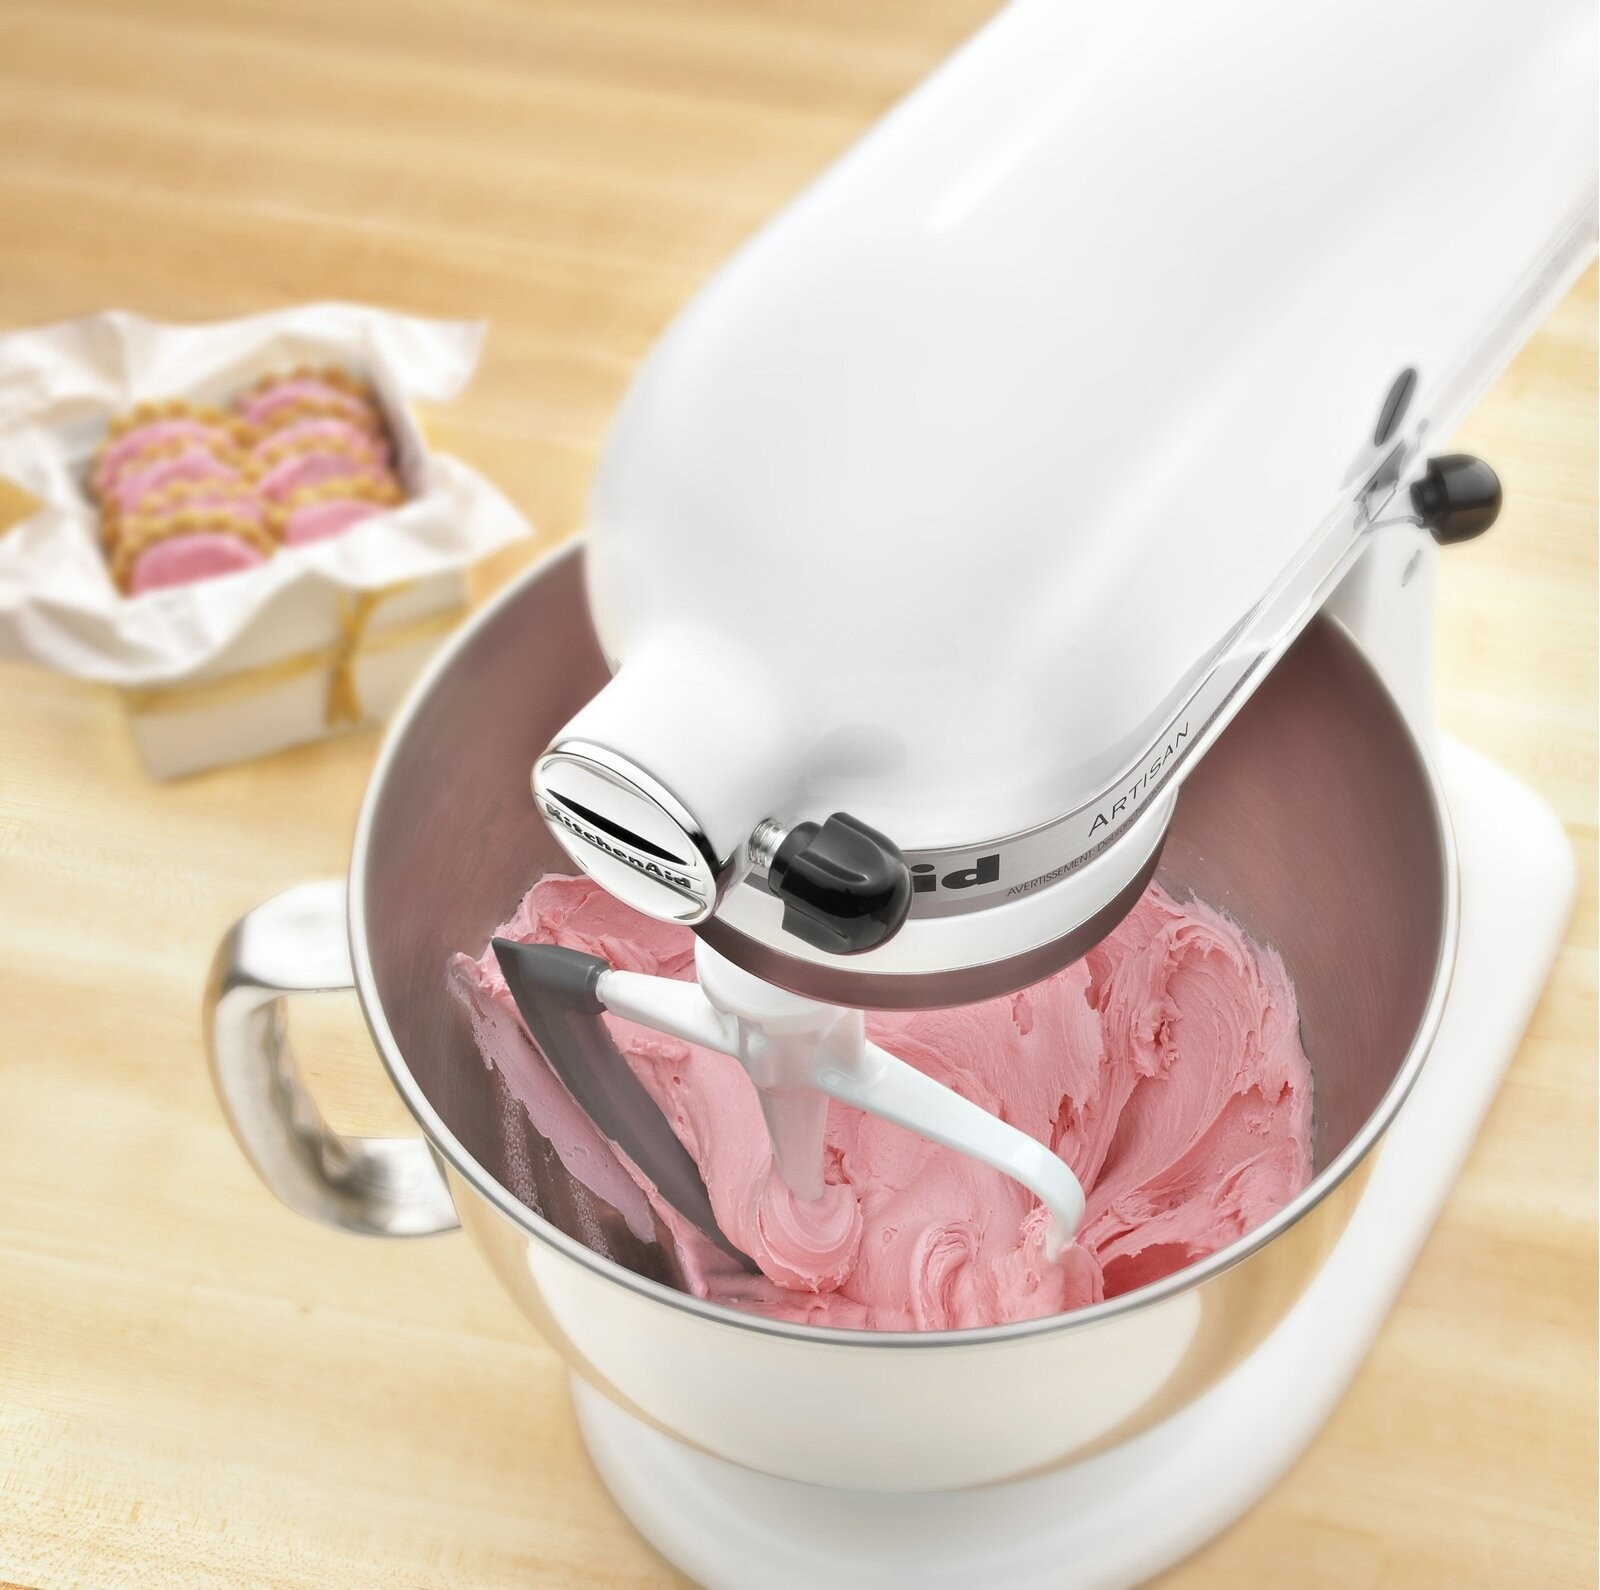 the flex-head beater making icing in the stand mixer